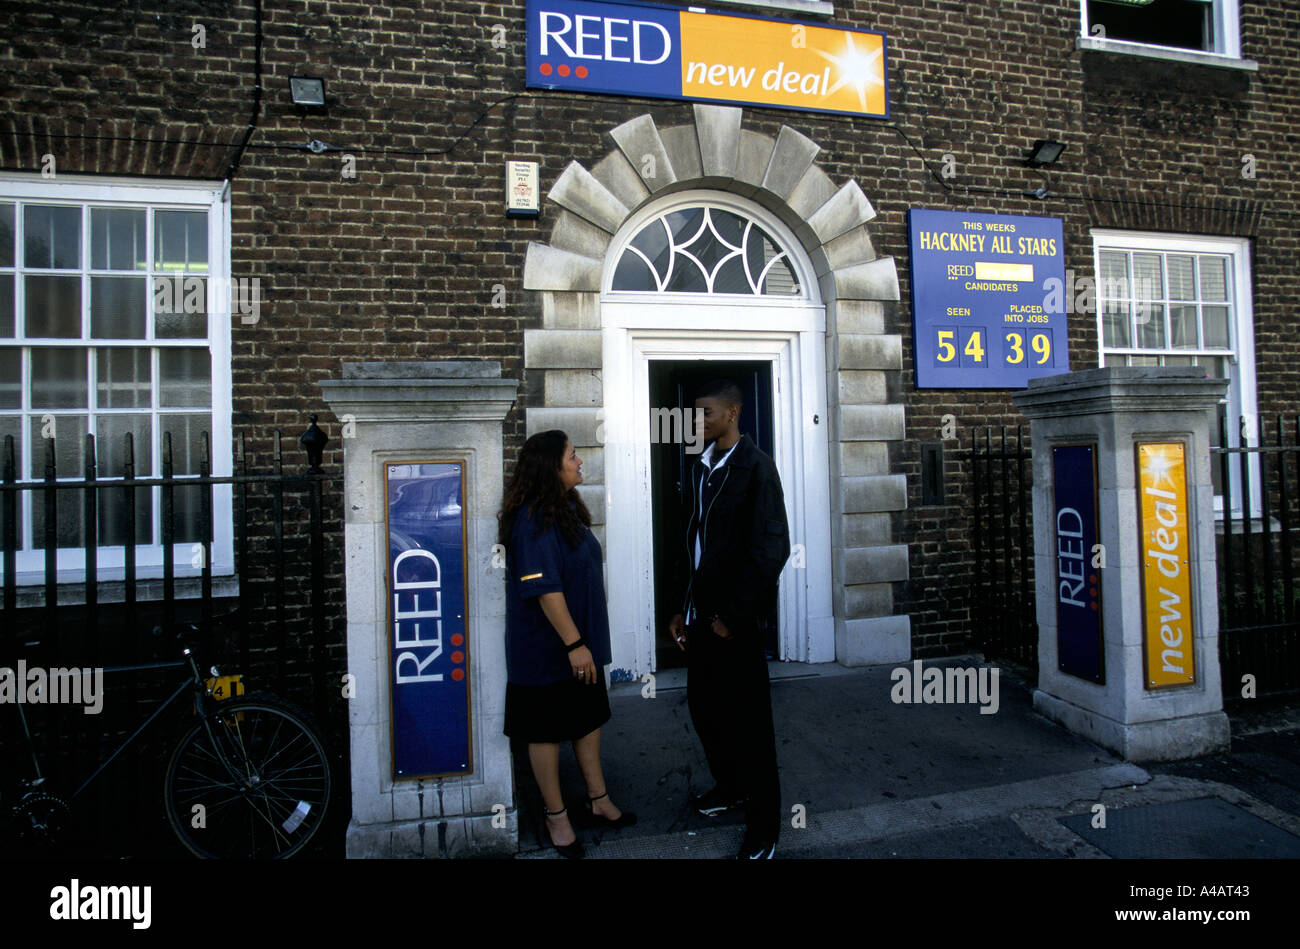 reed new deal job centre 2000 Stock Photo